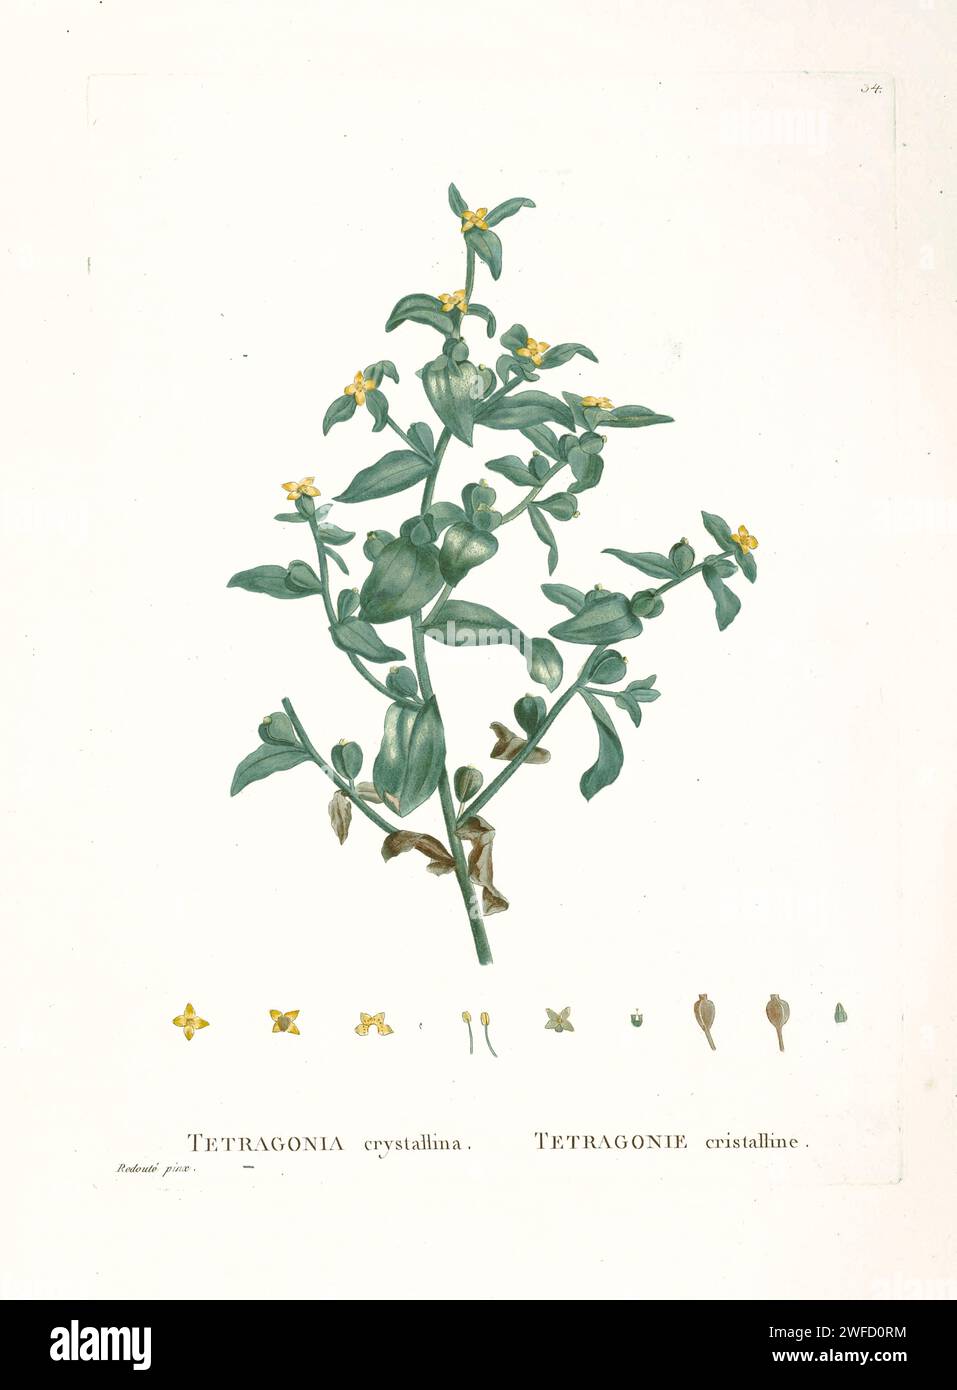 Tetragonia crystallina from History of Succulent Plants [Plantarum historia succulentarum / Histoire des plantes grasses] painted by Pierre-Joseph Redouté and described by Augustin Pyramus de Candolle Tetragonia is a genus of about 85 species of flowering plants in the family Aizoaceae, native to temperate and subtropical regions mostly of the Southern Hemisphere, in New Zealand, Australia, southern Africa and South America. Stock Photo